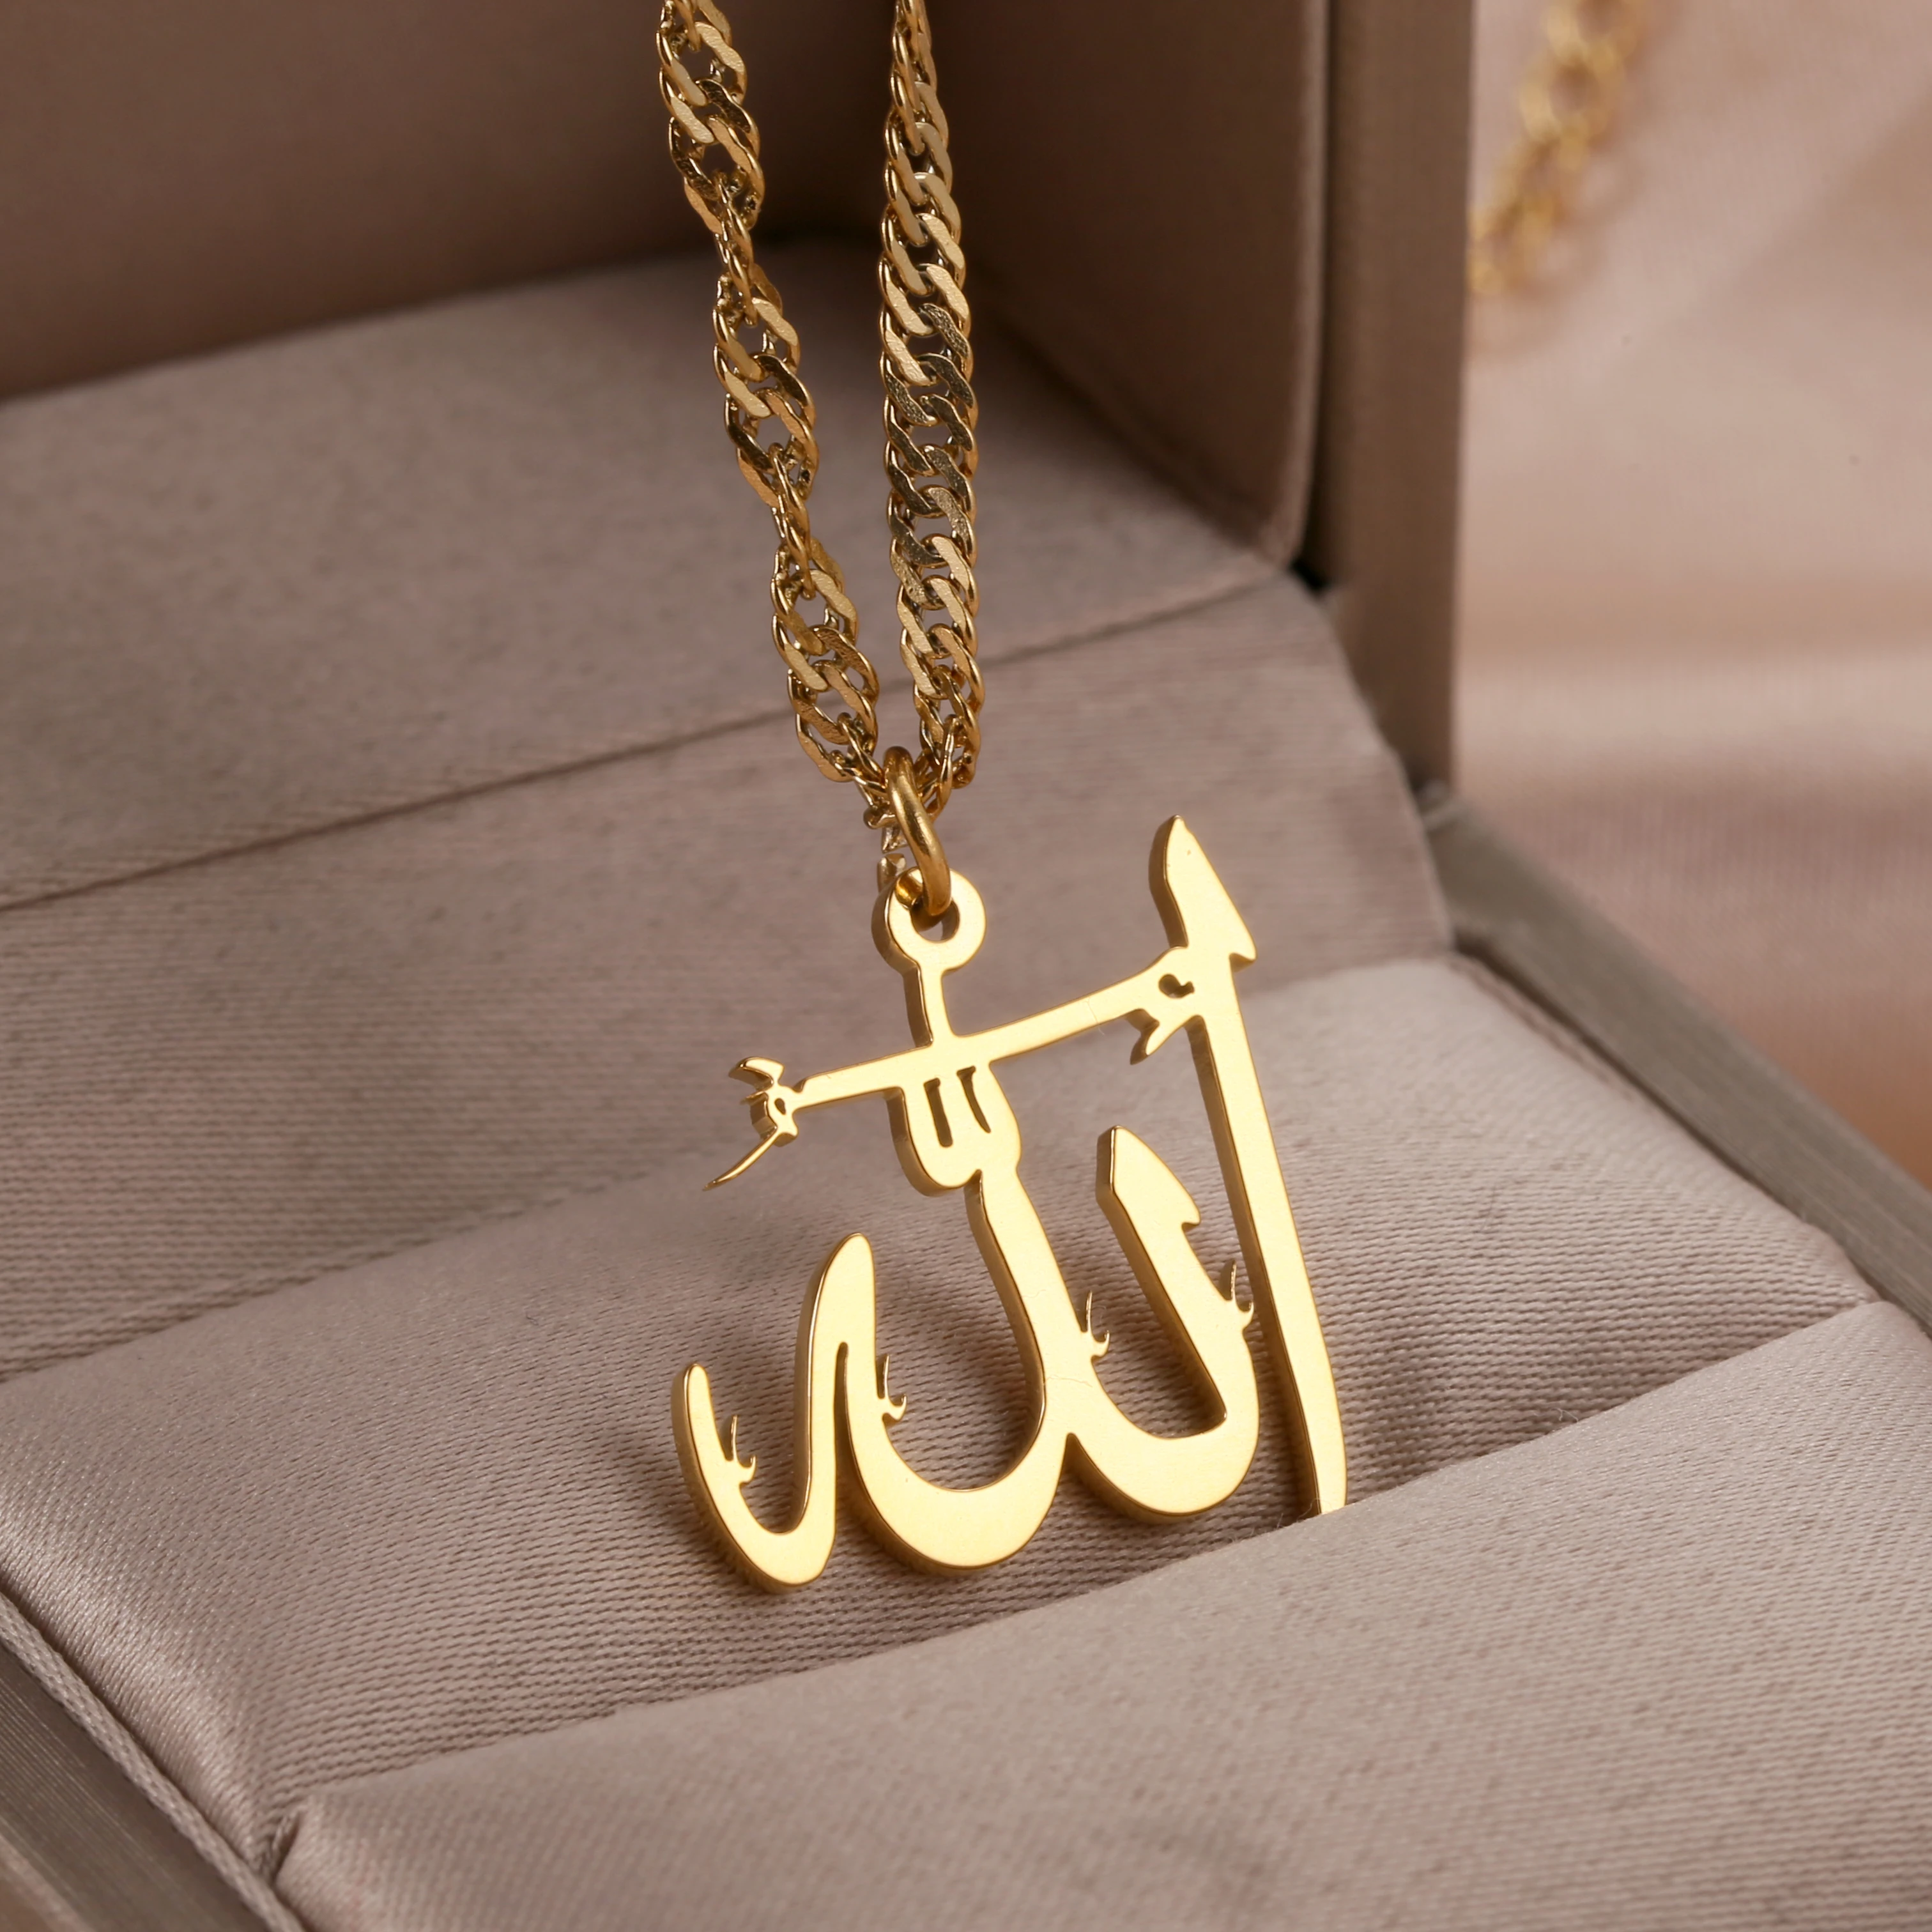 ALLAH PENDANT NECKLACE | WOMEN Custom Stainless Steel Necklaces Gold  Jewelry Pendants Islam Muslim Arabic God Messager Gifts|Customized  Necklaces| - AliExpress